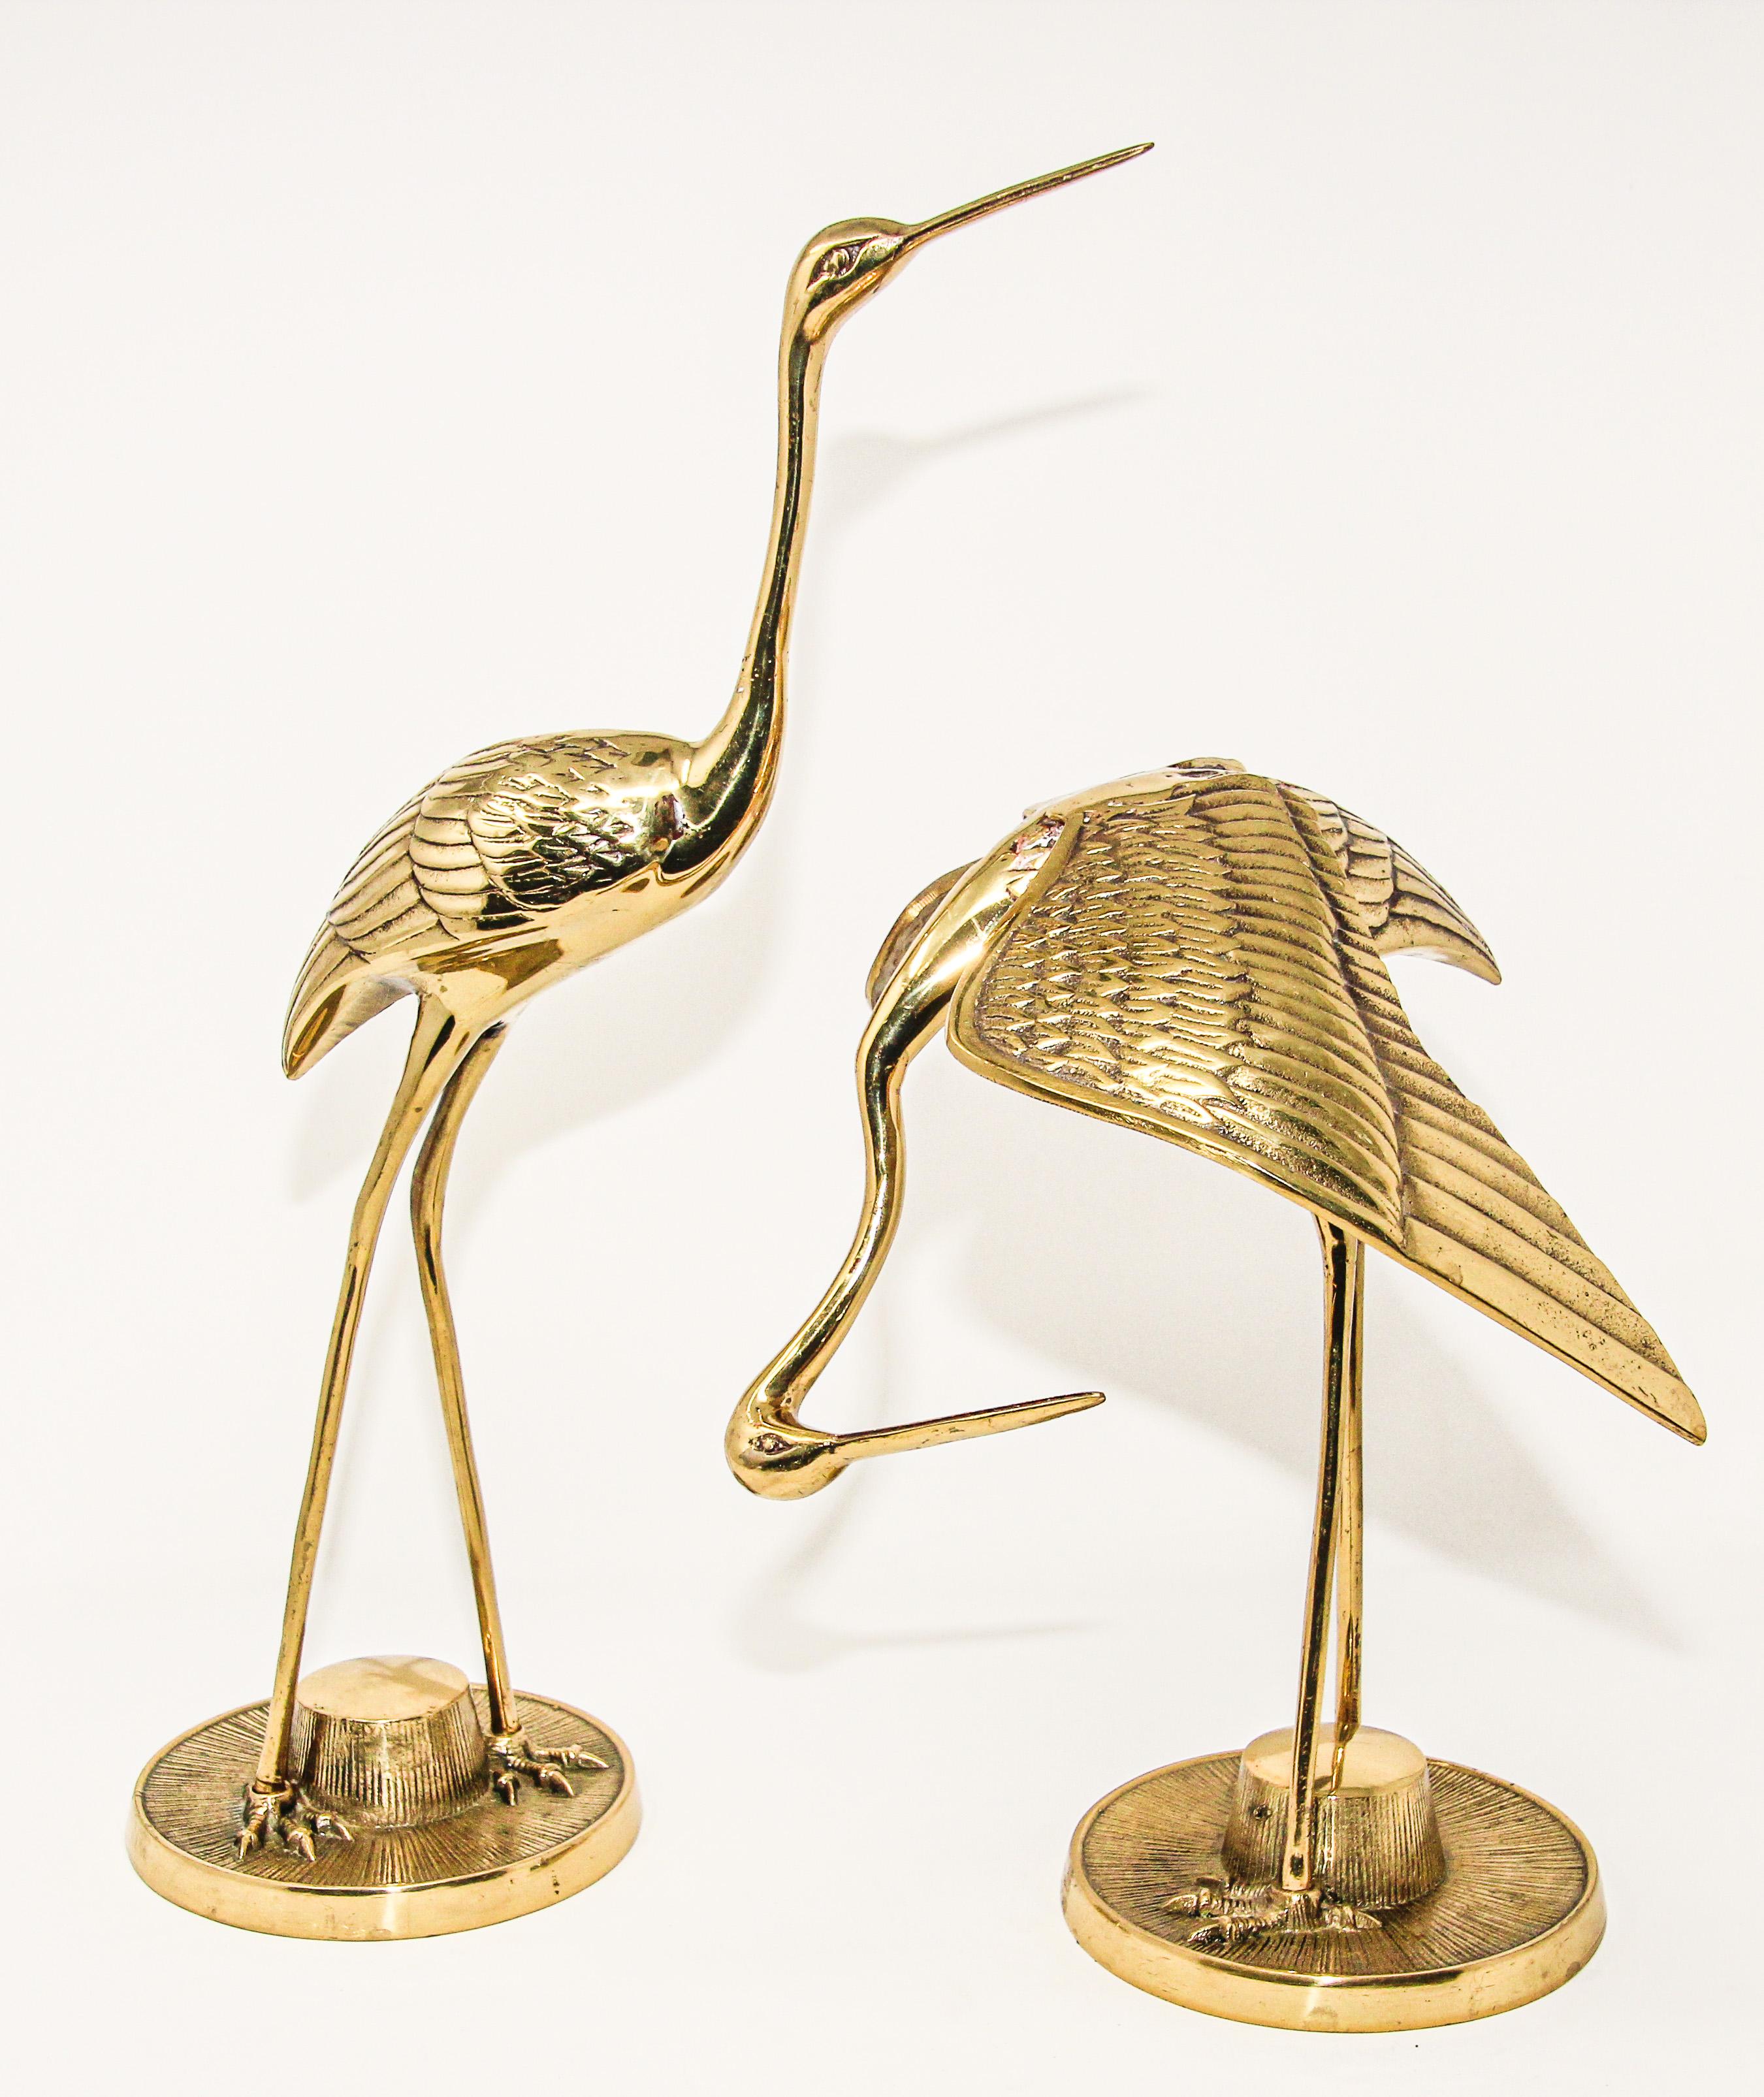 Set of two polished vintage cast metal solid brass heron crane figurines.
Large scale Hollywood Regency Asian style solid polished brass heron bird sculptures.
These vintage pair of brass Asian inspired crane sculpture are the perfect pieces to